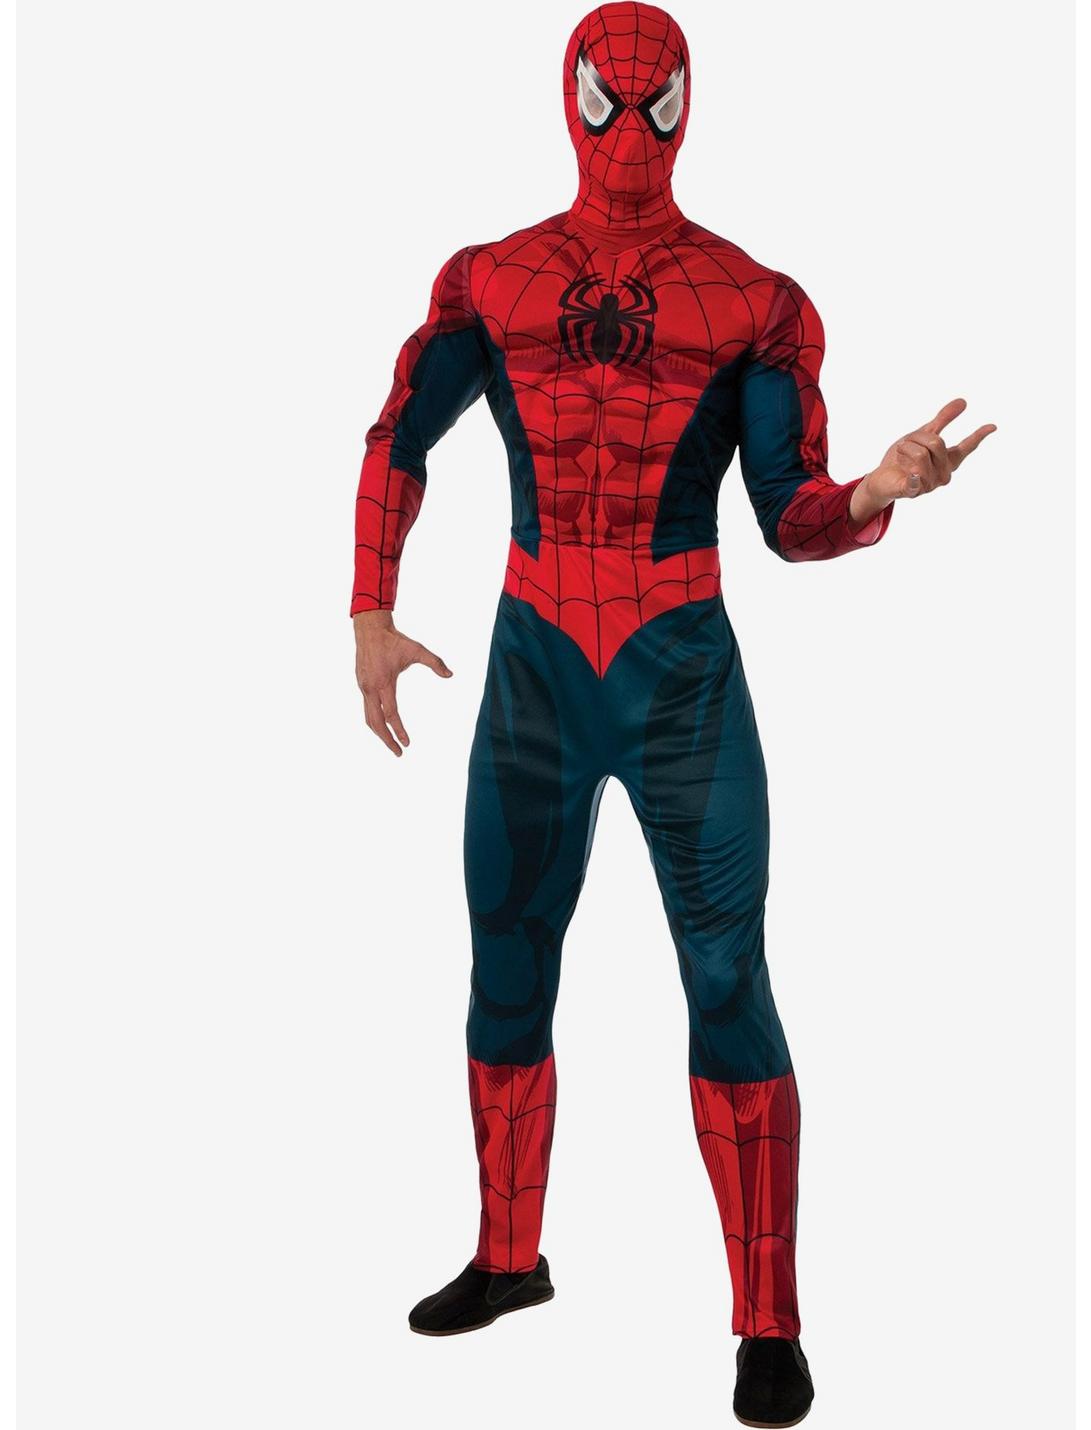 Marvel Spider-Man Muscle Costume, RED, hi-res